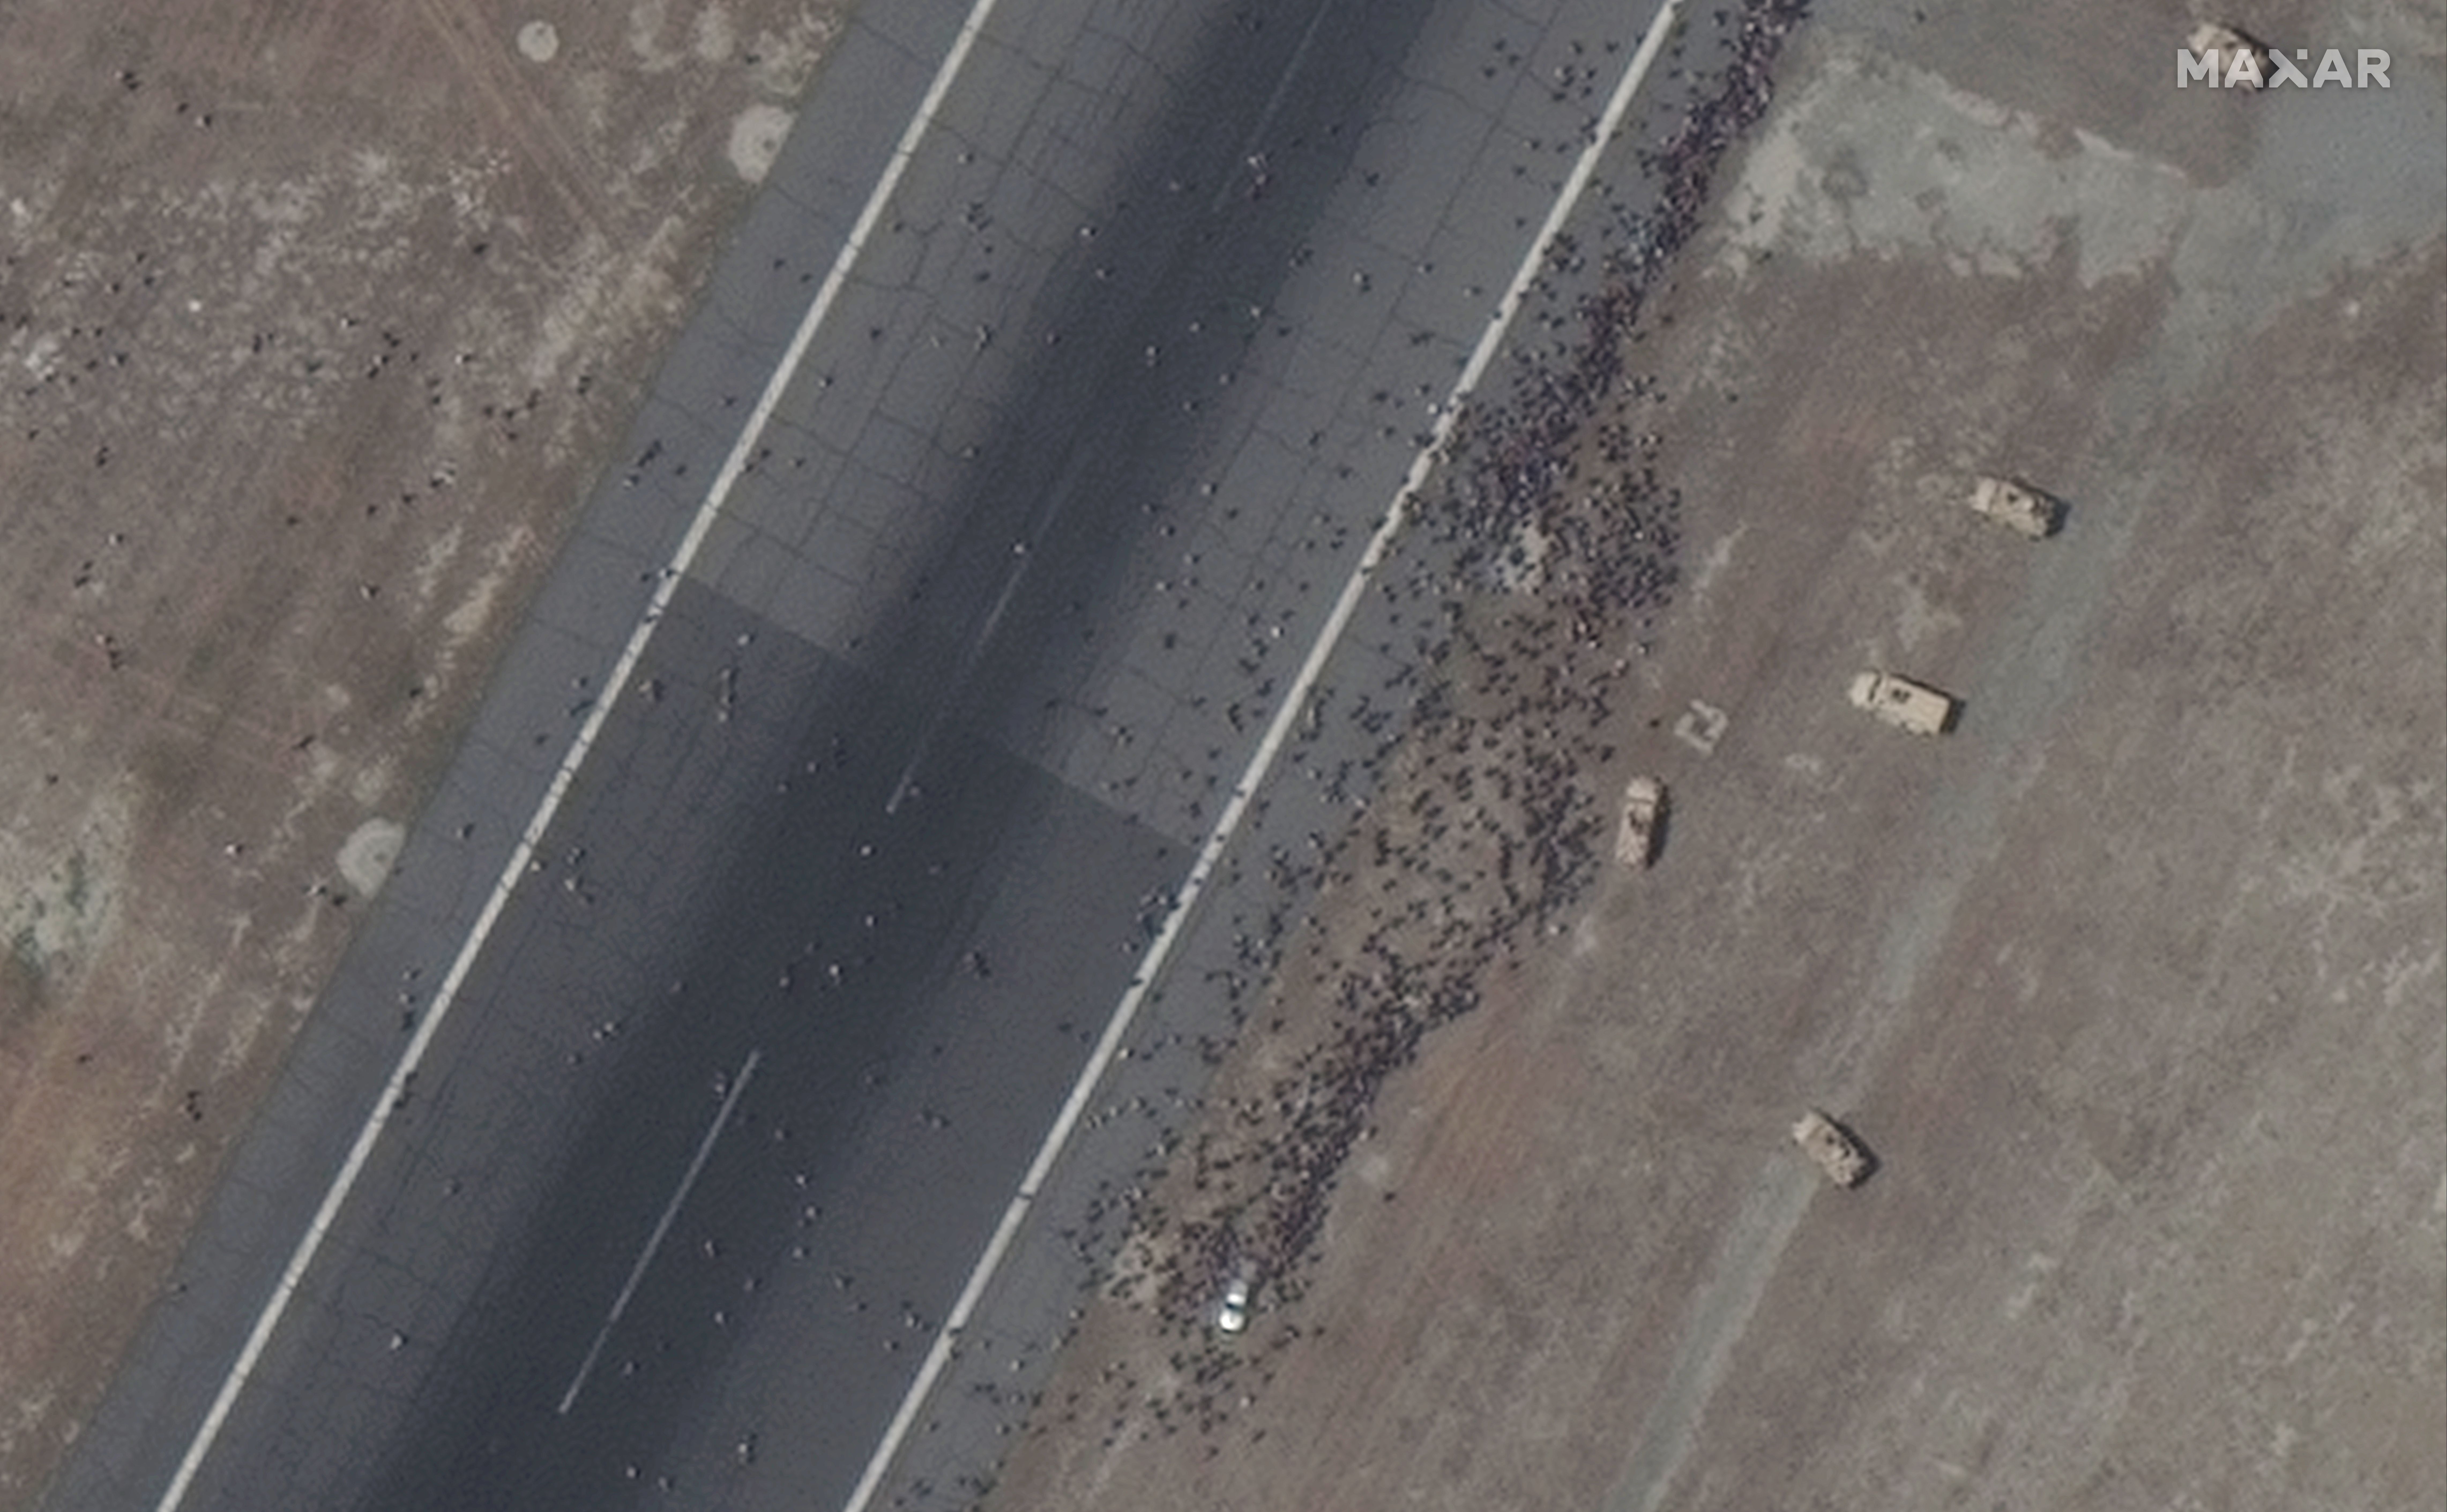 Close up view of crowds along the runway of the Kabul airport on Tuesday. Photo: Satellite image ©2021 Maxar Technologies    